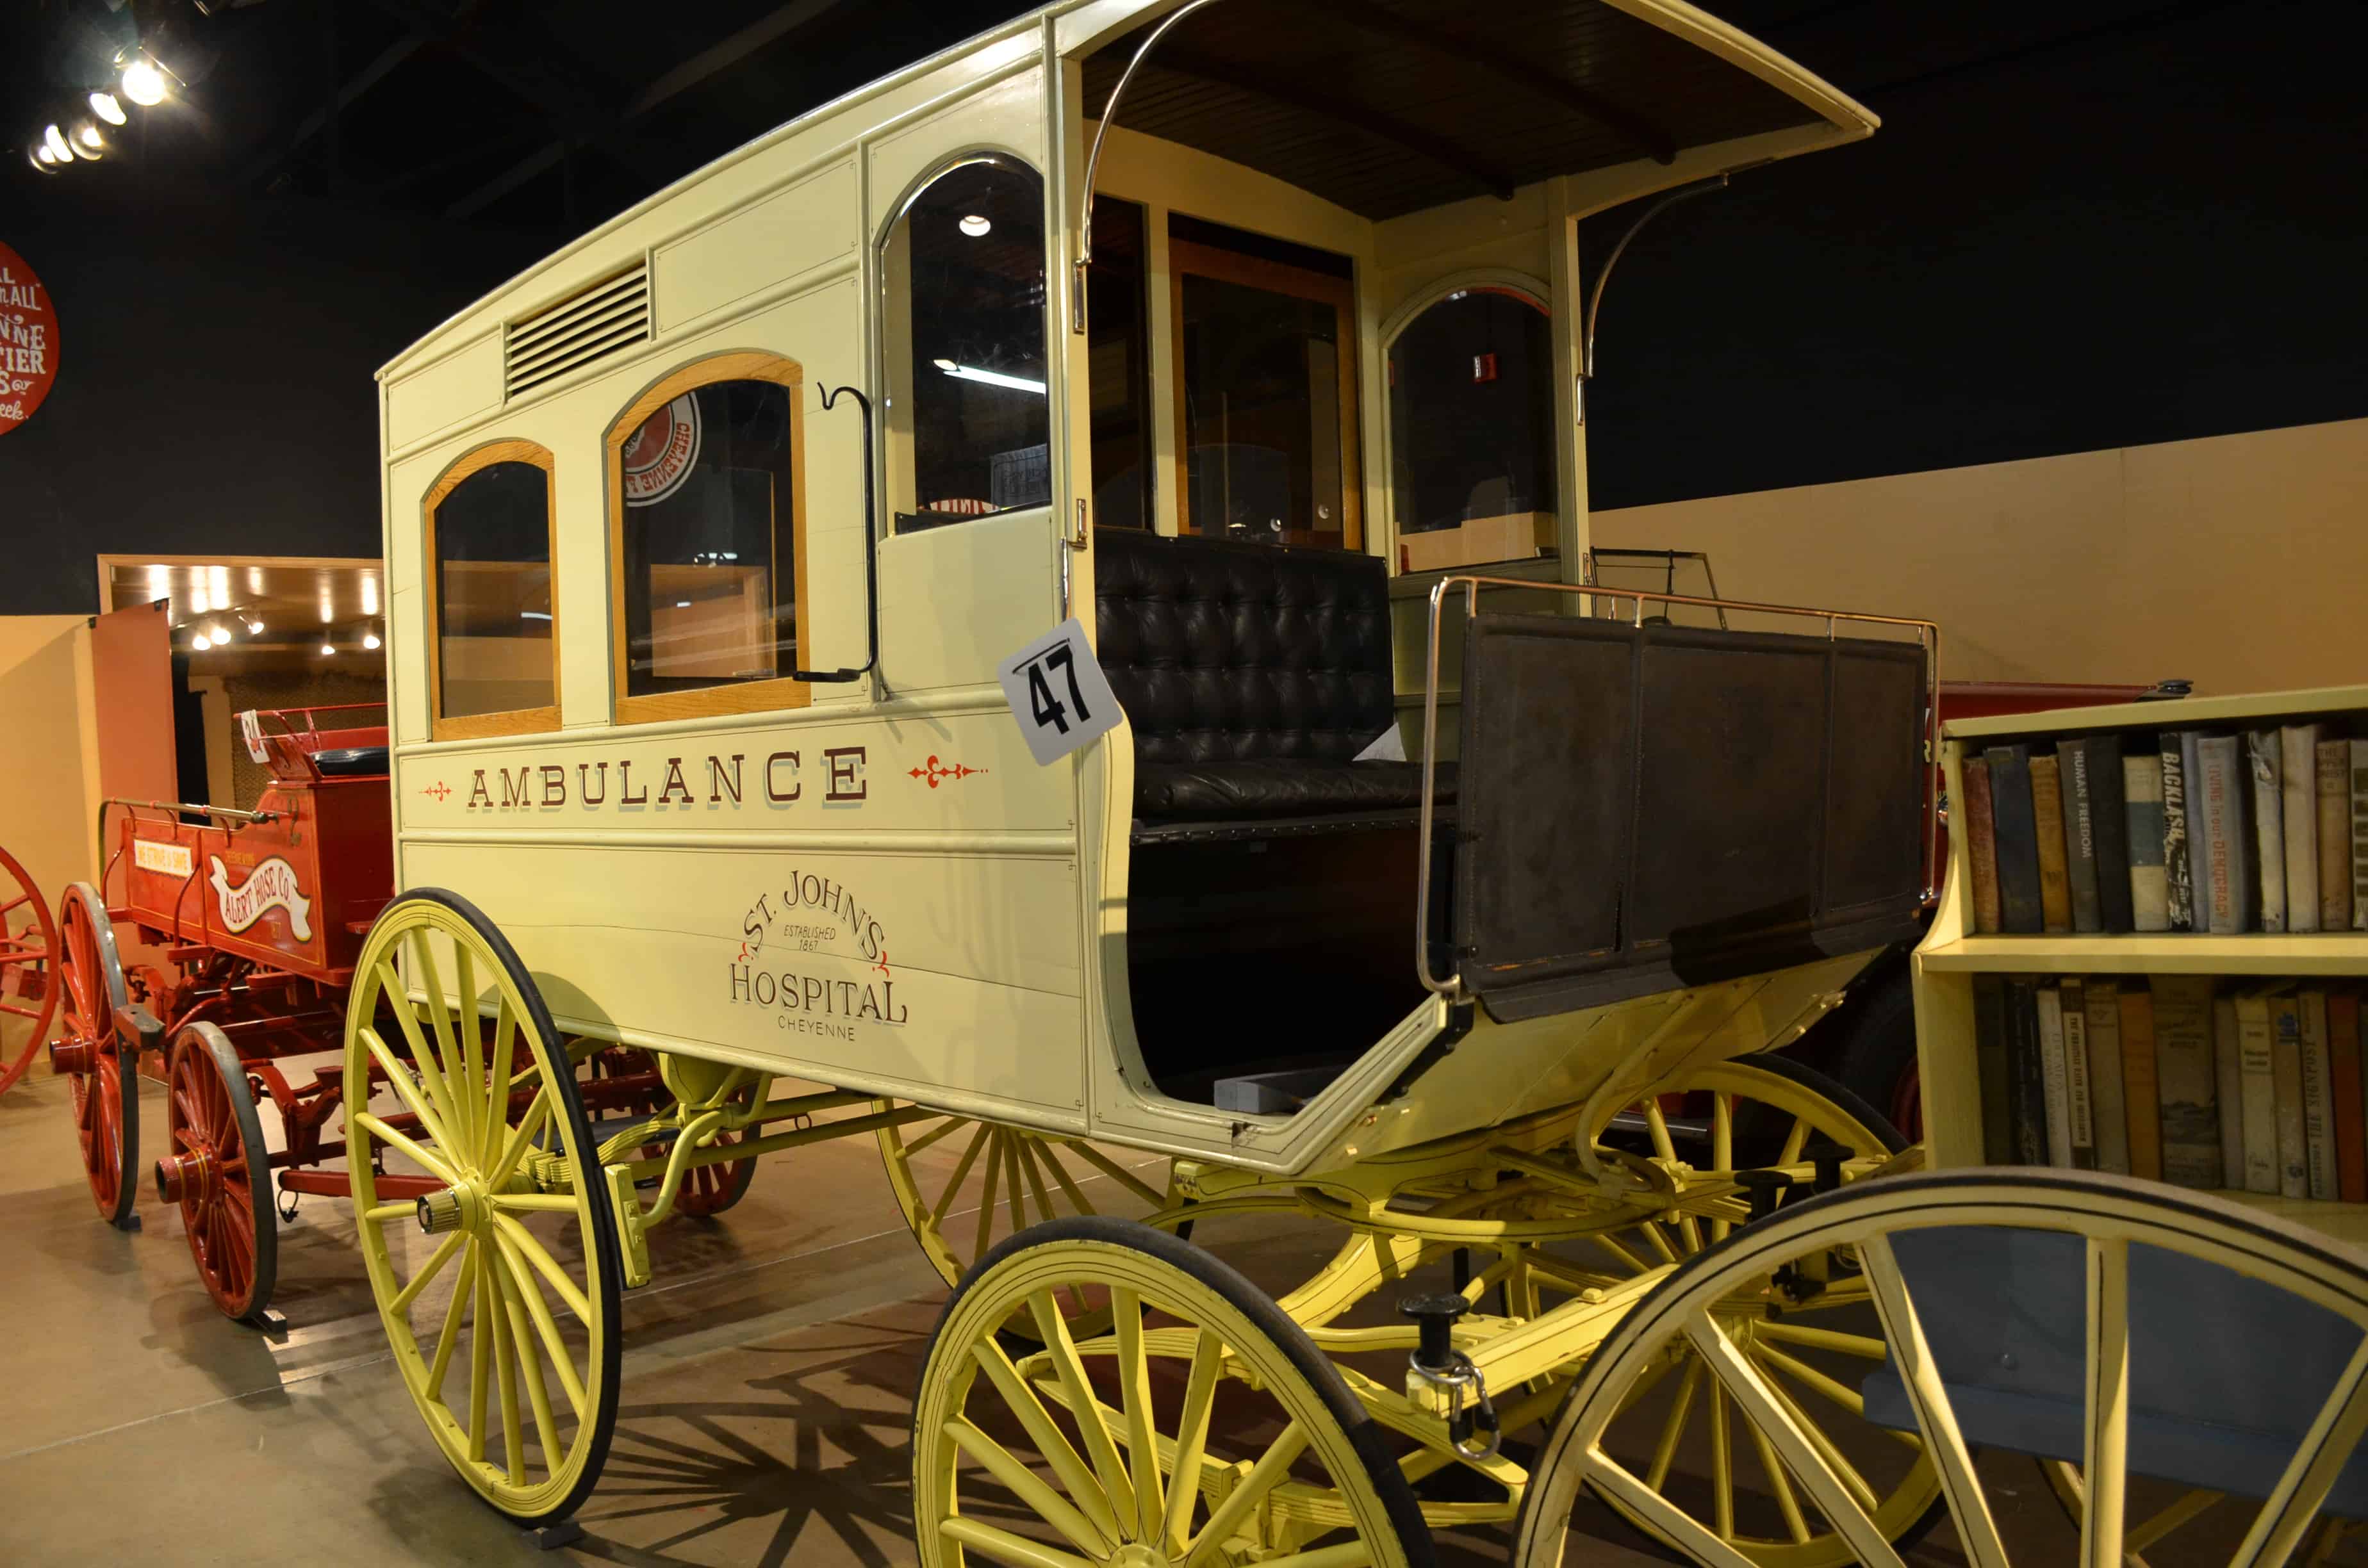 Ambulance carriage at the Cheyenne Frontier Days Old West Museum in Wyoming